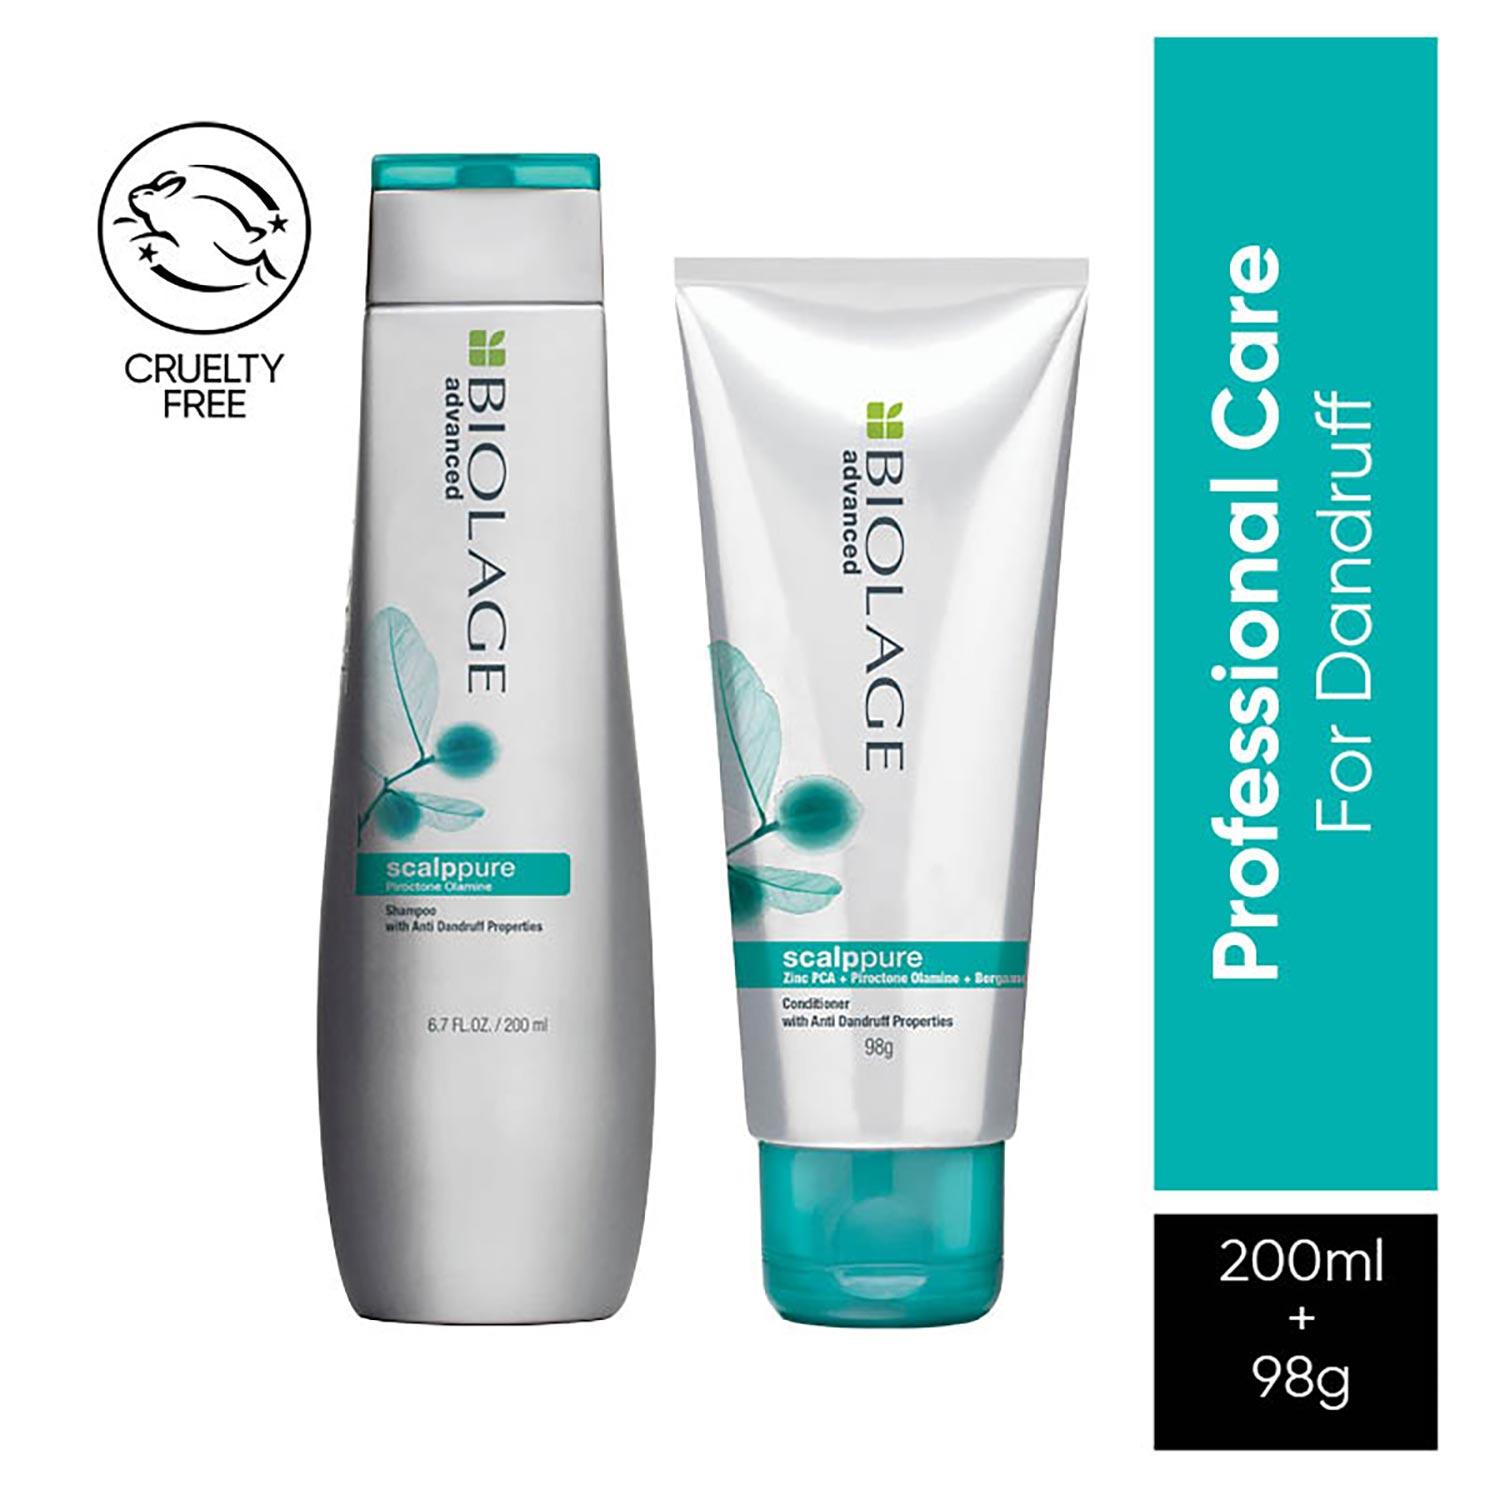 Biolage | Biolage Scalppure Shampoo & Conditioner Combo, Removes Flakes from 1st Wash (200 ml + 98 g)